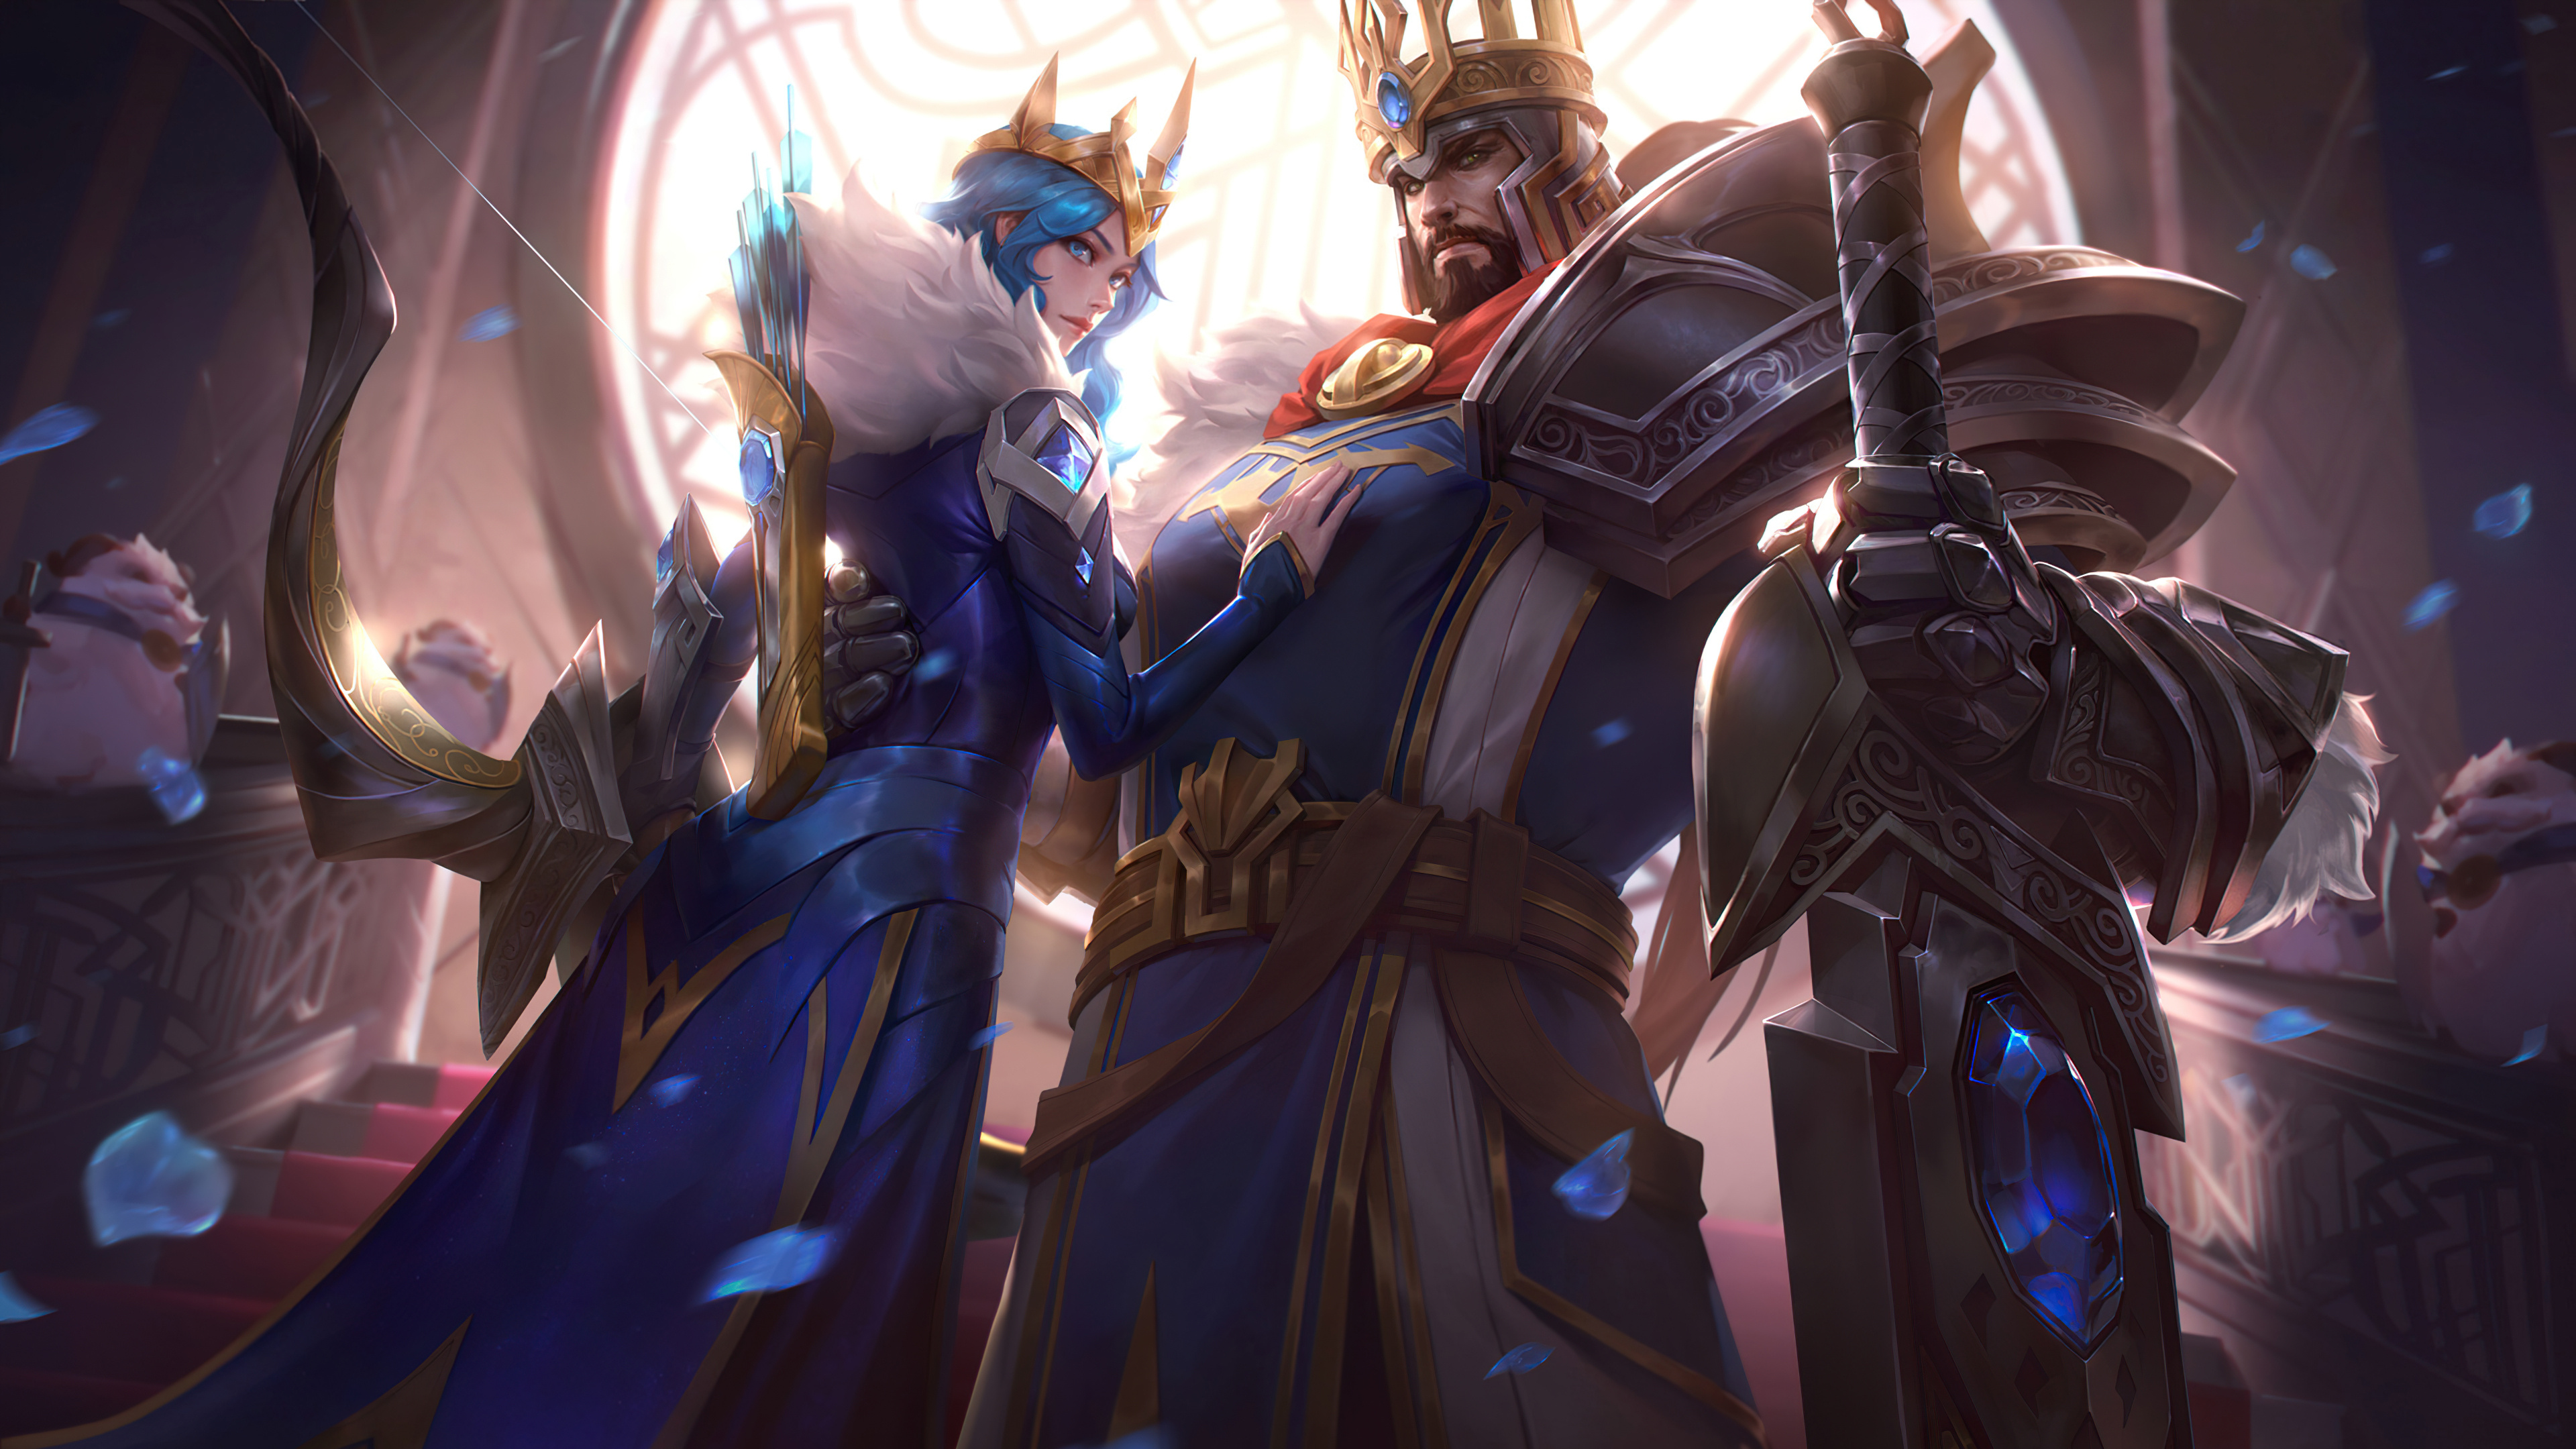 Tryndamere League Of Legends Riot Games Ashe Ashe League Of Legends ADC Adcarry Freljord 3840x2160